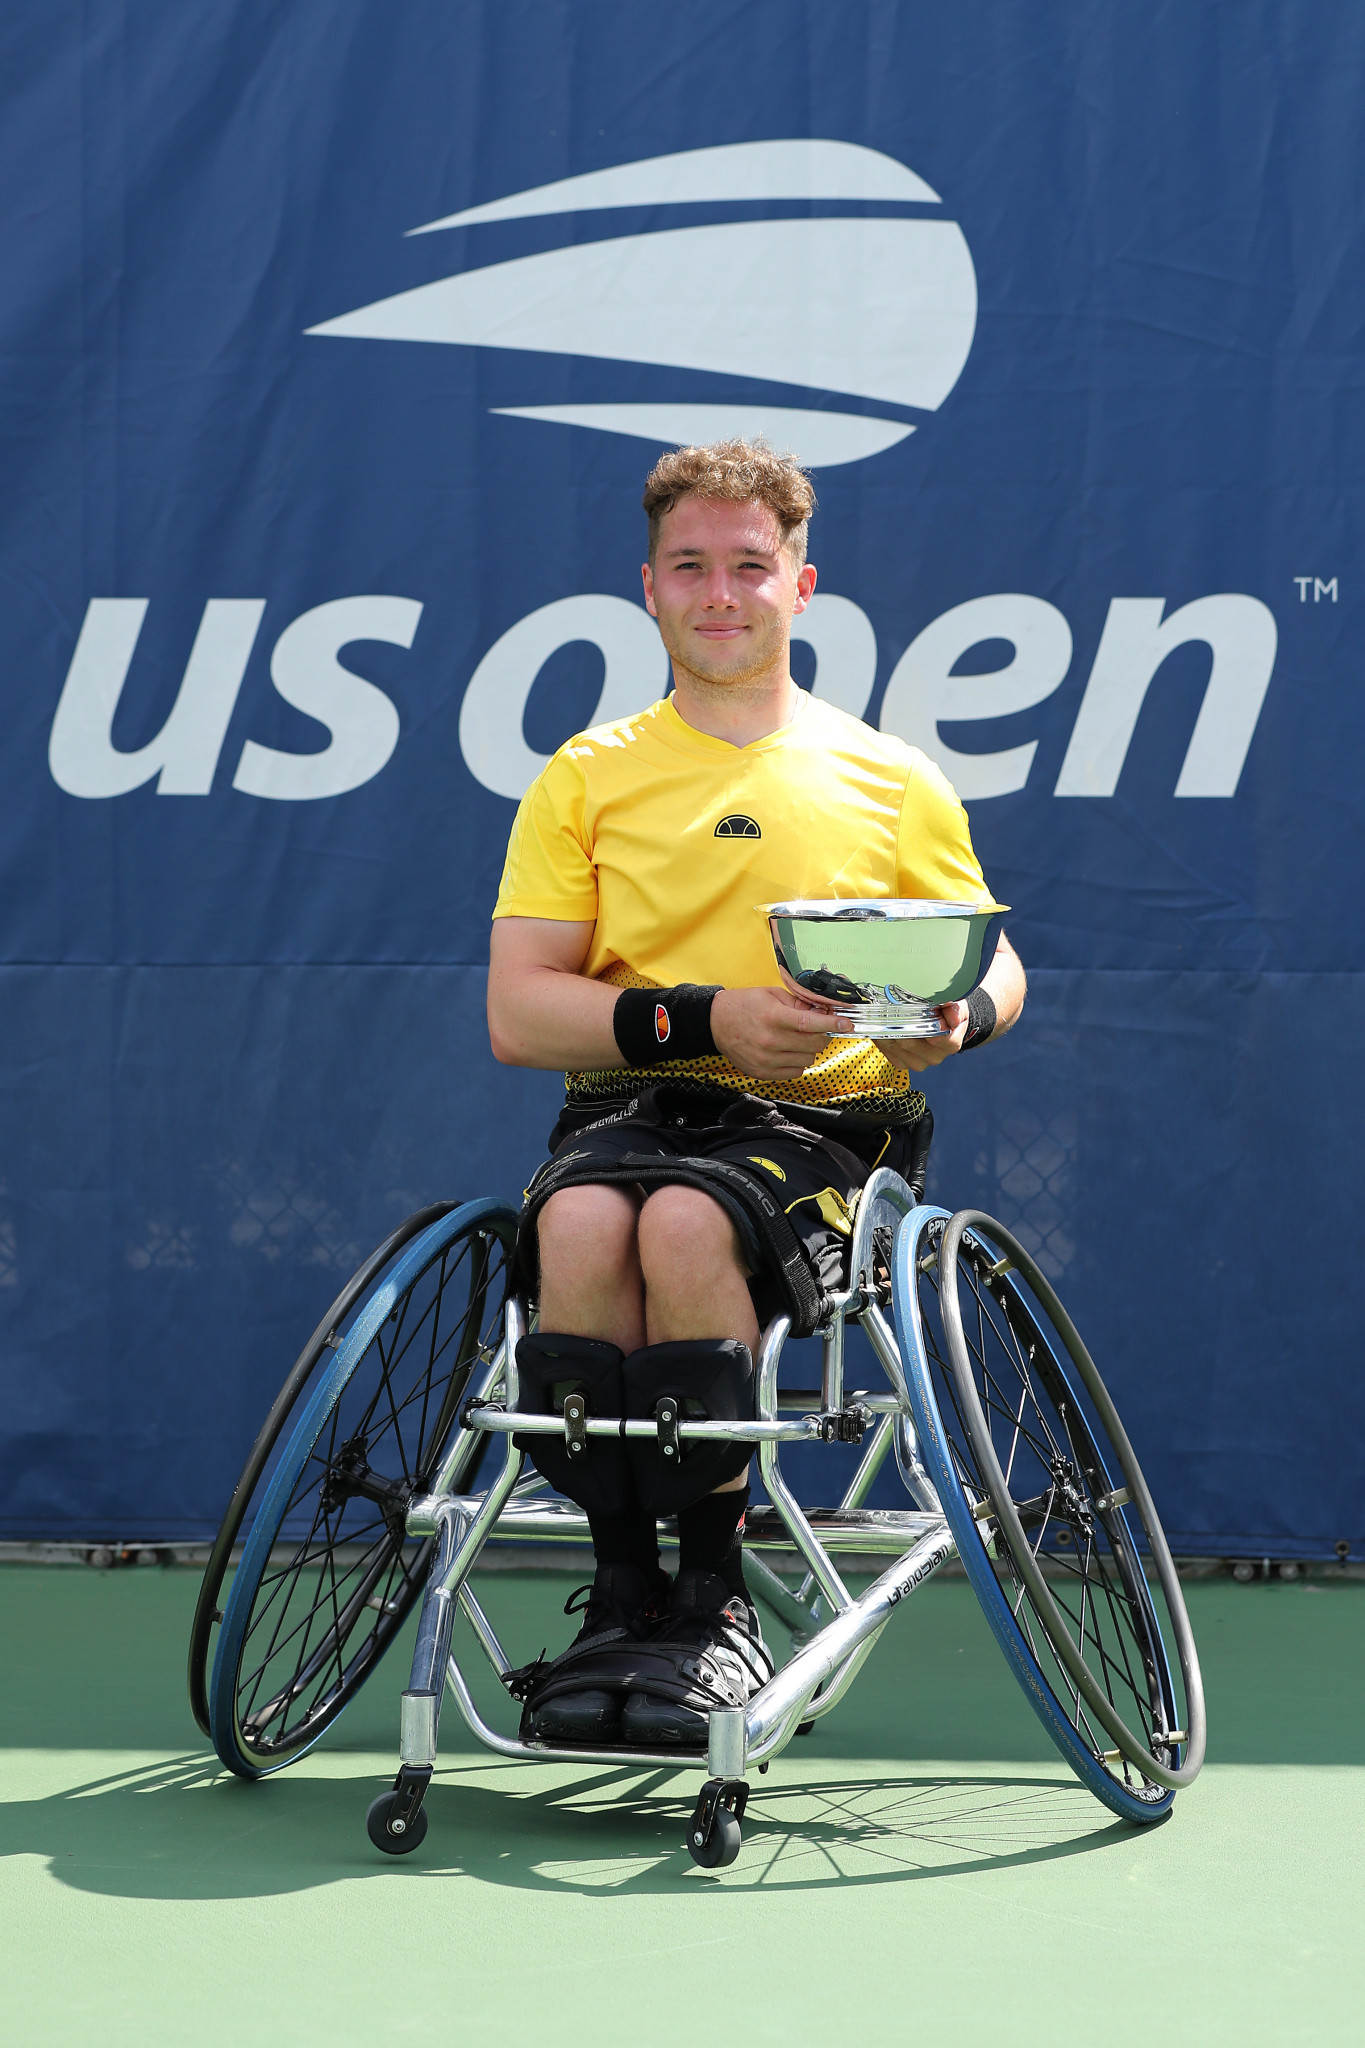 Hewett, Lapthorne and De Groot sweep titles as wheelchair tennis action ends at US Open 